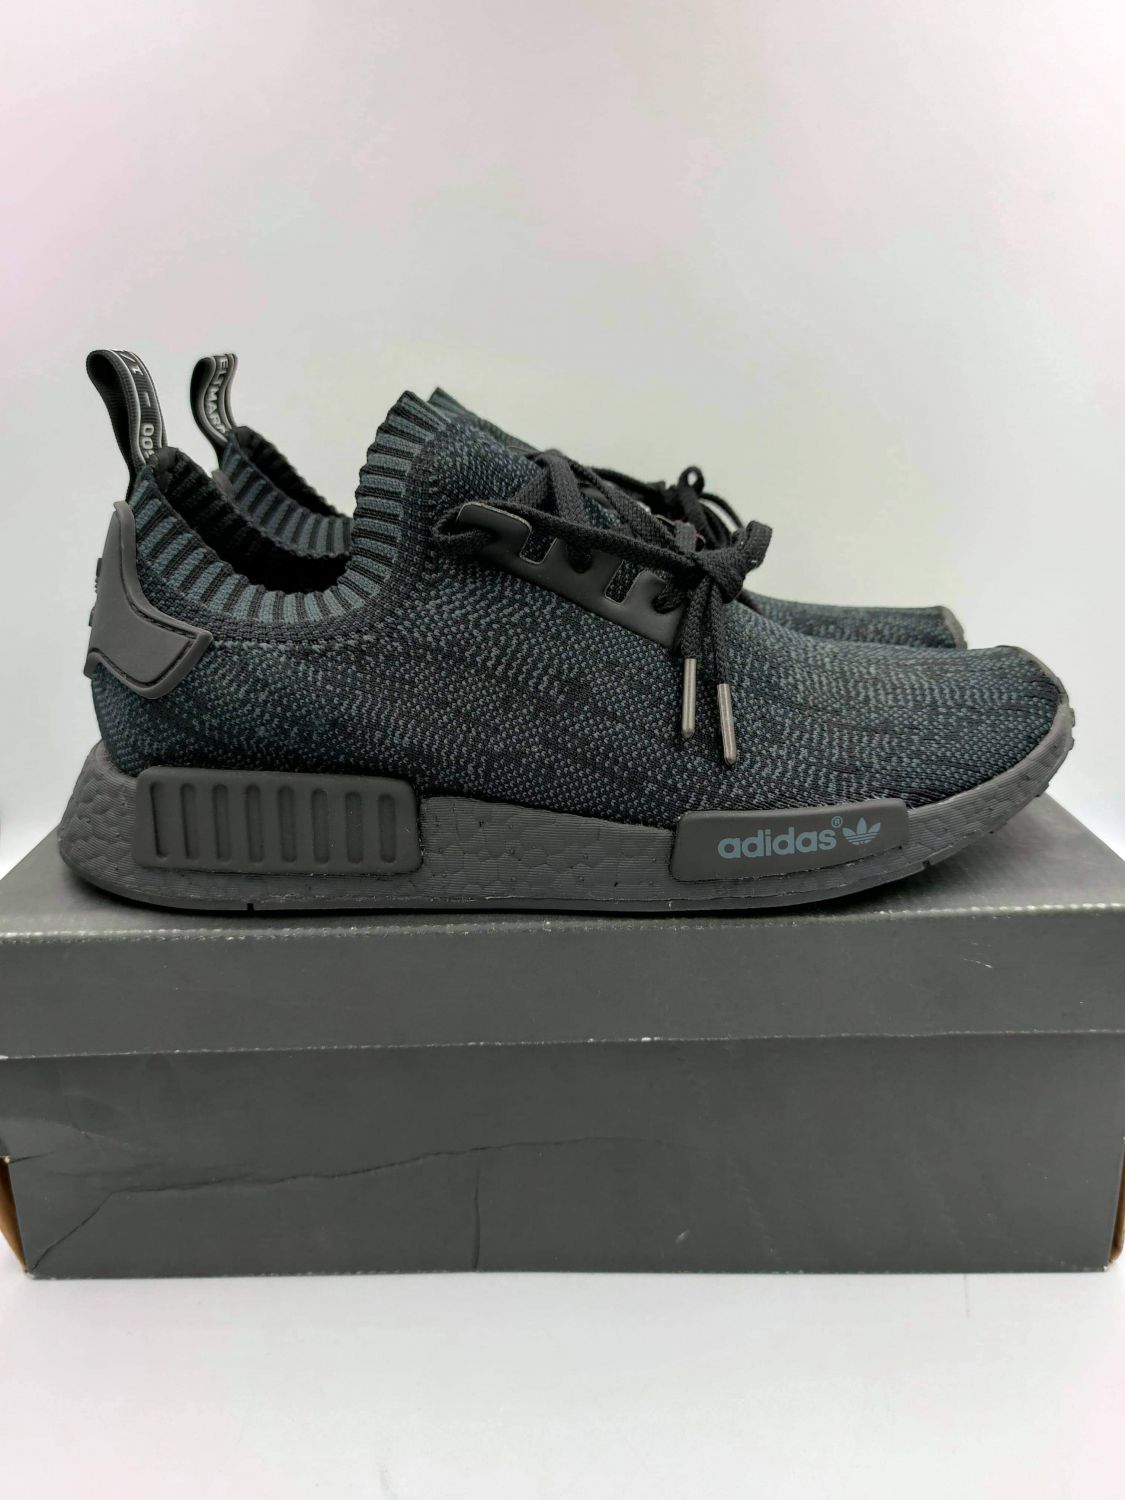 Adidas NMD R1 Friends And Family Pitch Black | AfterMarket